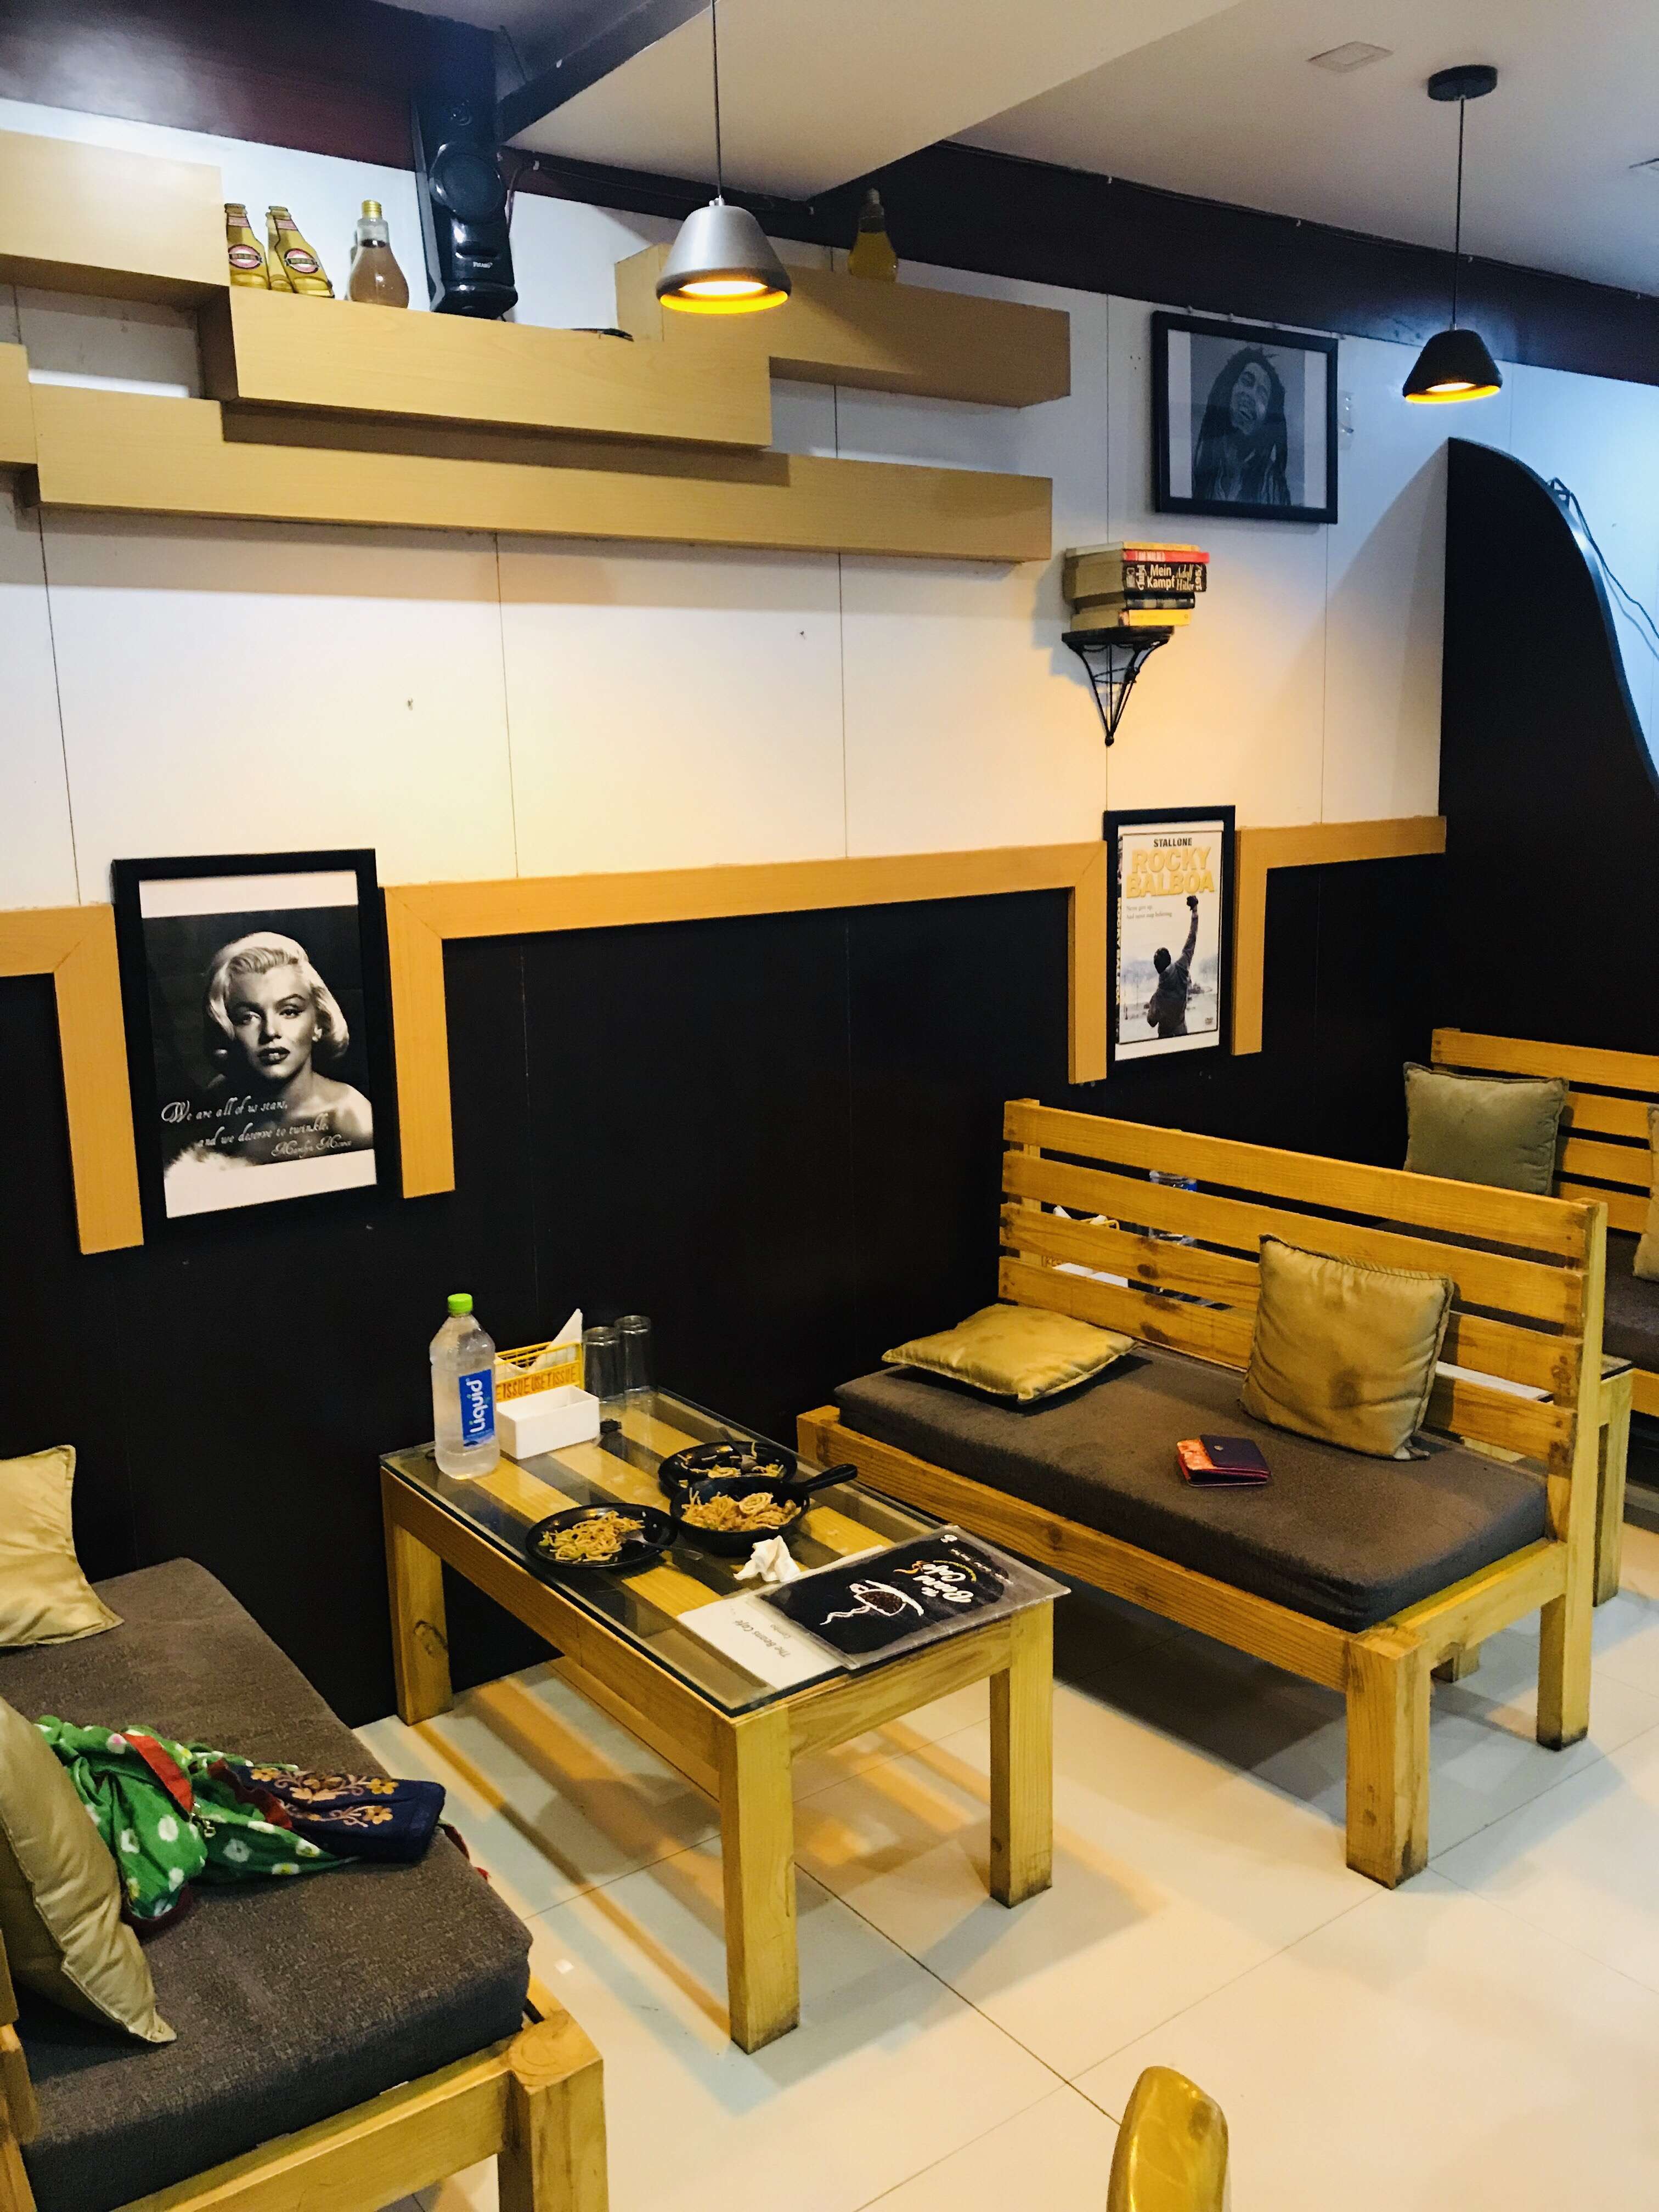 The Beans Cafe Photos Pictures Of The Beans Cafe City Center Gwalior